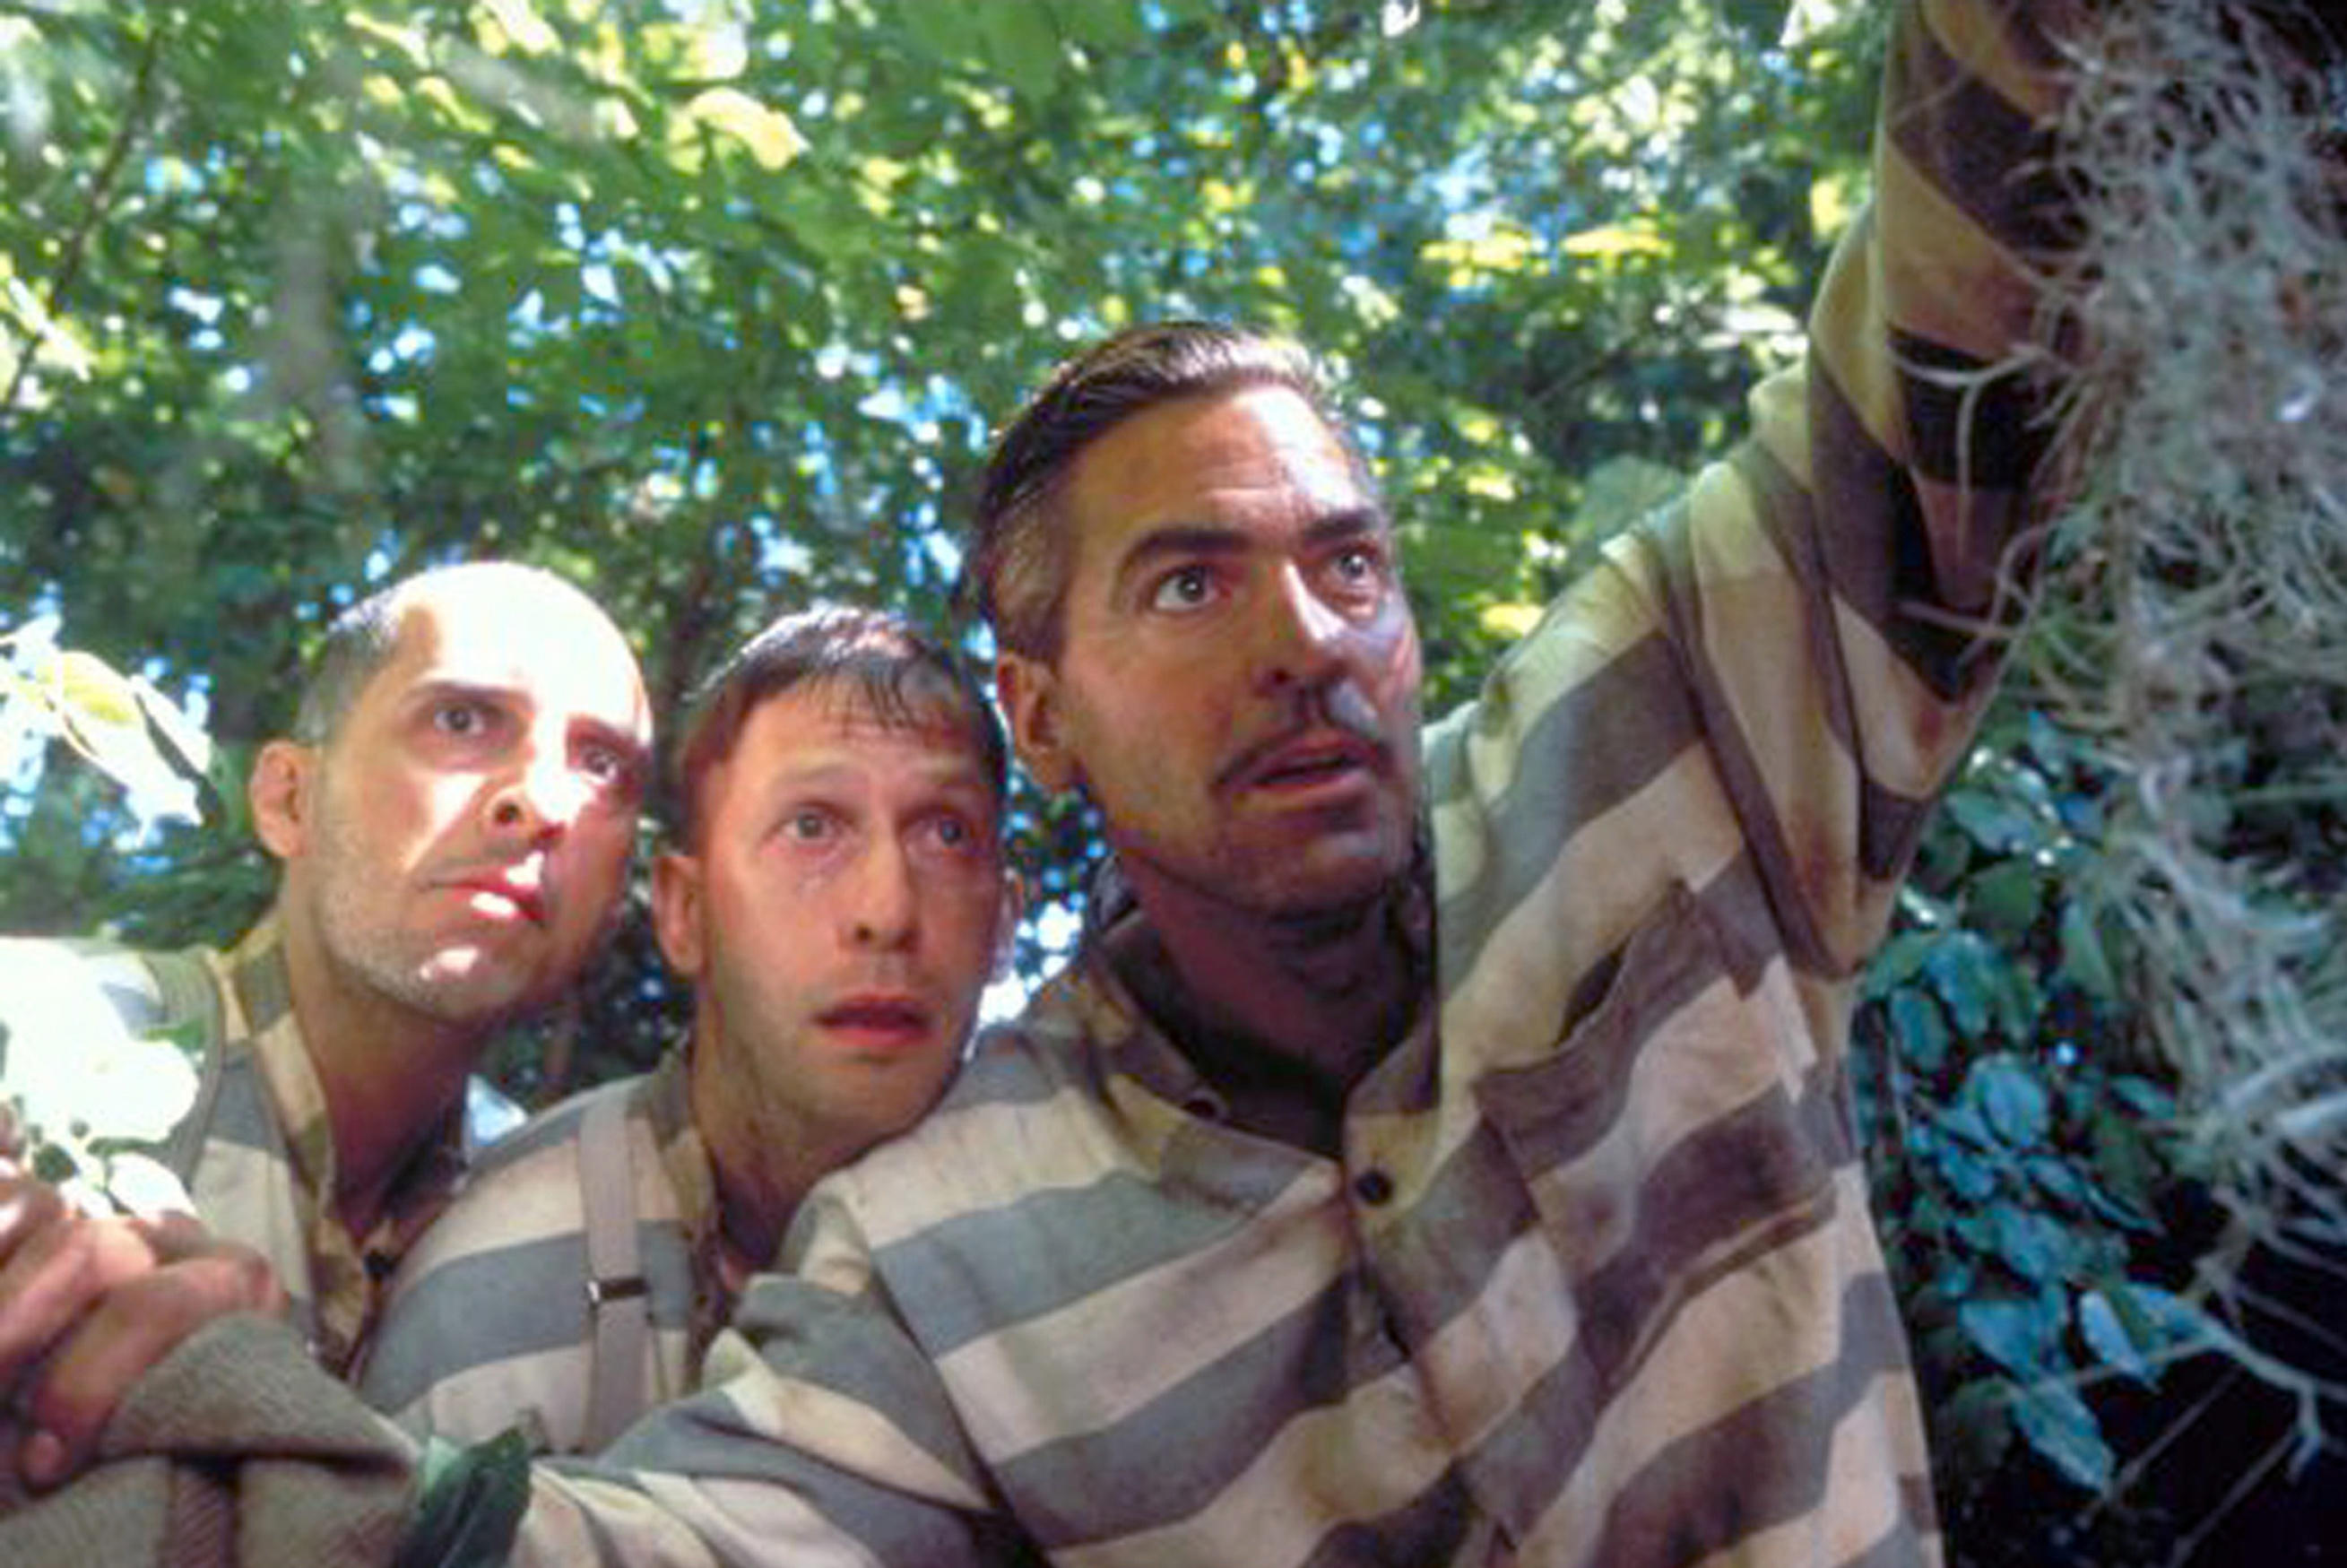 John Turturro as Pete, Tim Blake Nelson as Delmar and George Clooney as Ulysses stare into the distance in O Brother, Where Art Thou?